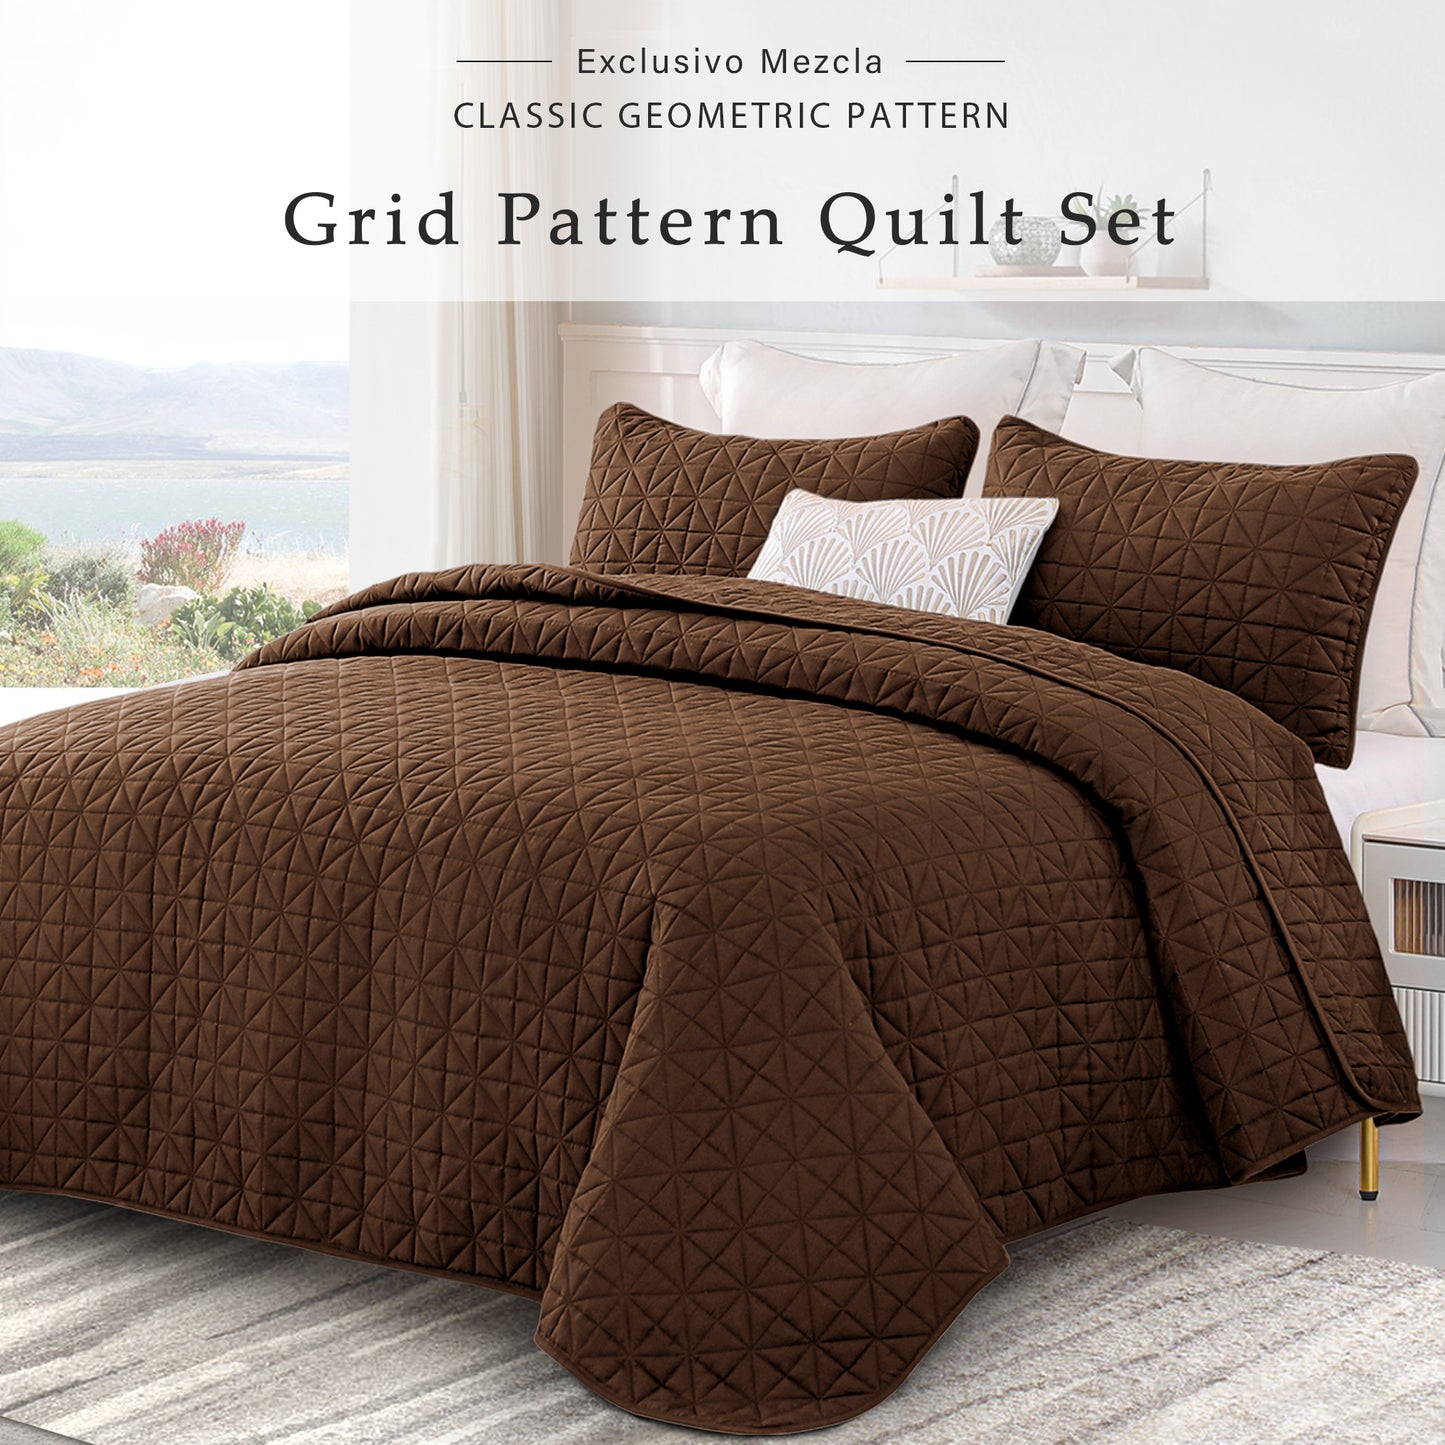 Exclusivo Mezcla Queen Quilt Bedding Set for All Seasons, Lightweight Soft Brown Quilts Queen Size Bedspreads Coverlets Bed Cover with Geometric Stitched Pattern, (1 Quilt, 2 Pillow Shams)